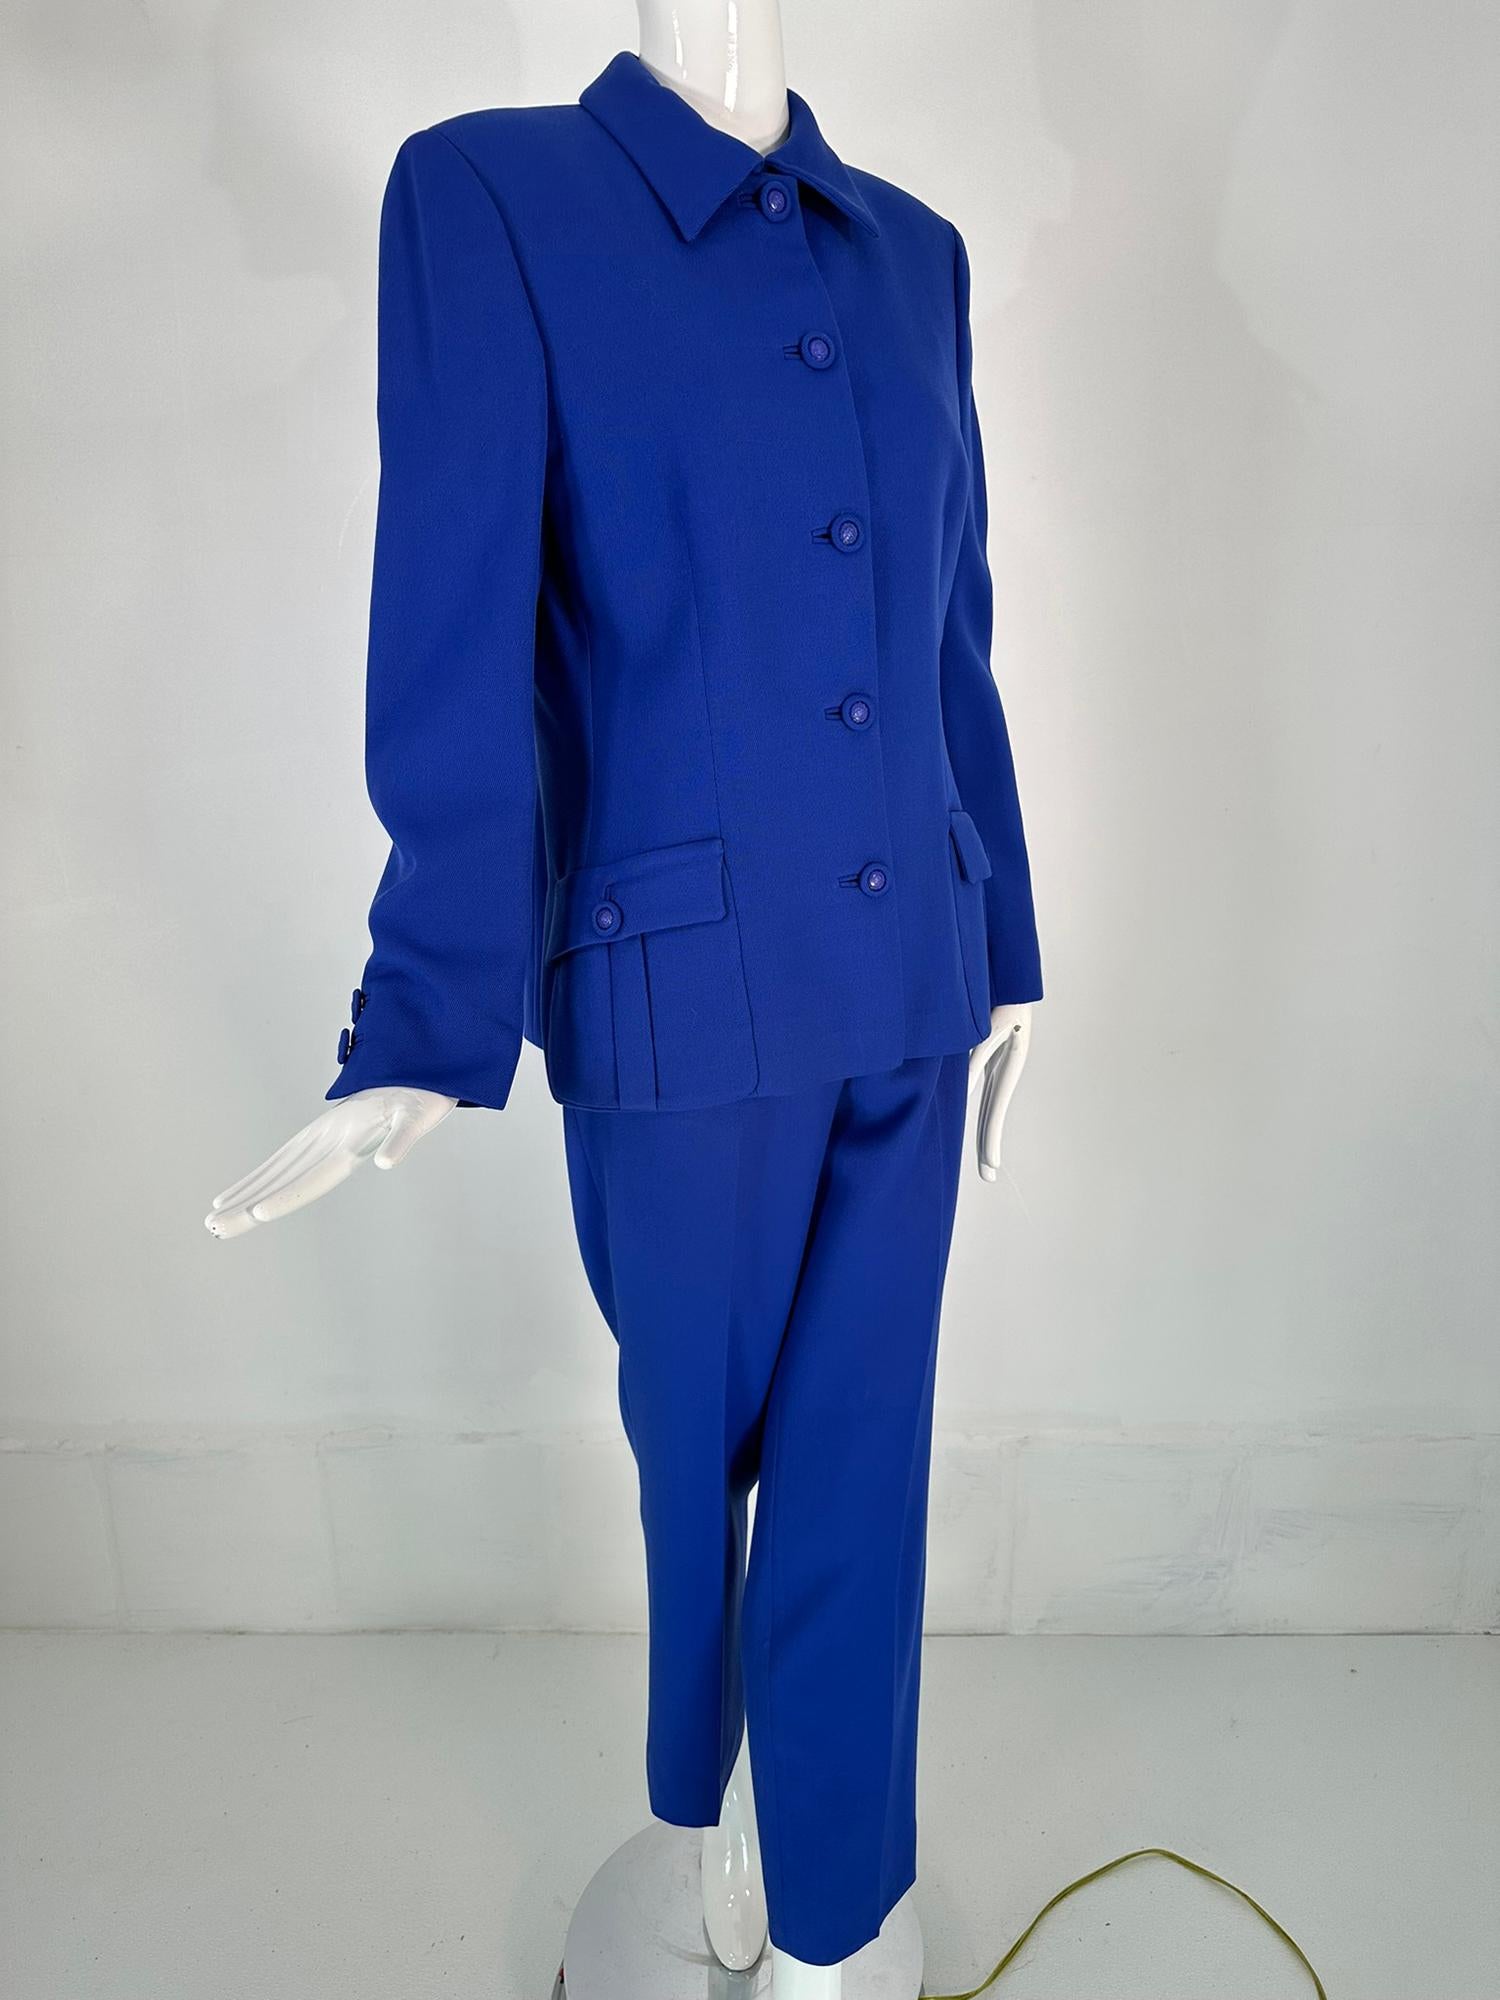 Gianni Versace Couture F/W 1995 Royal Blue Wool Pant Suit  For Sale 6